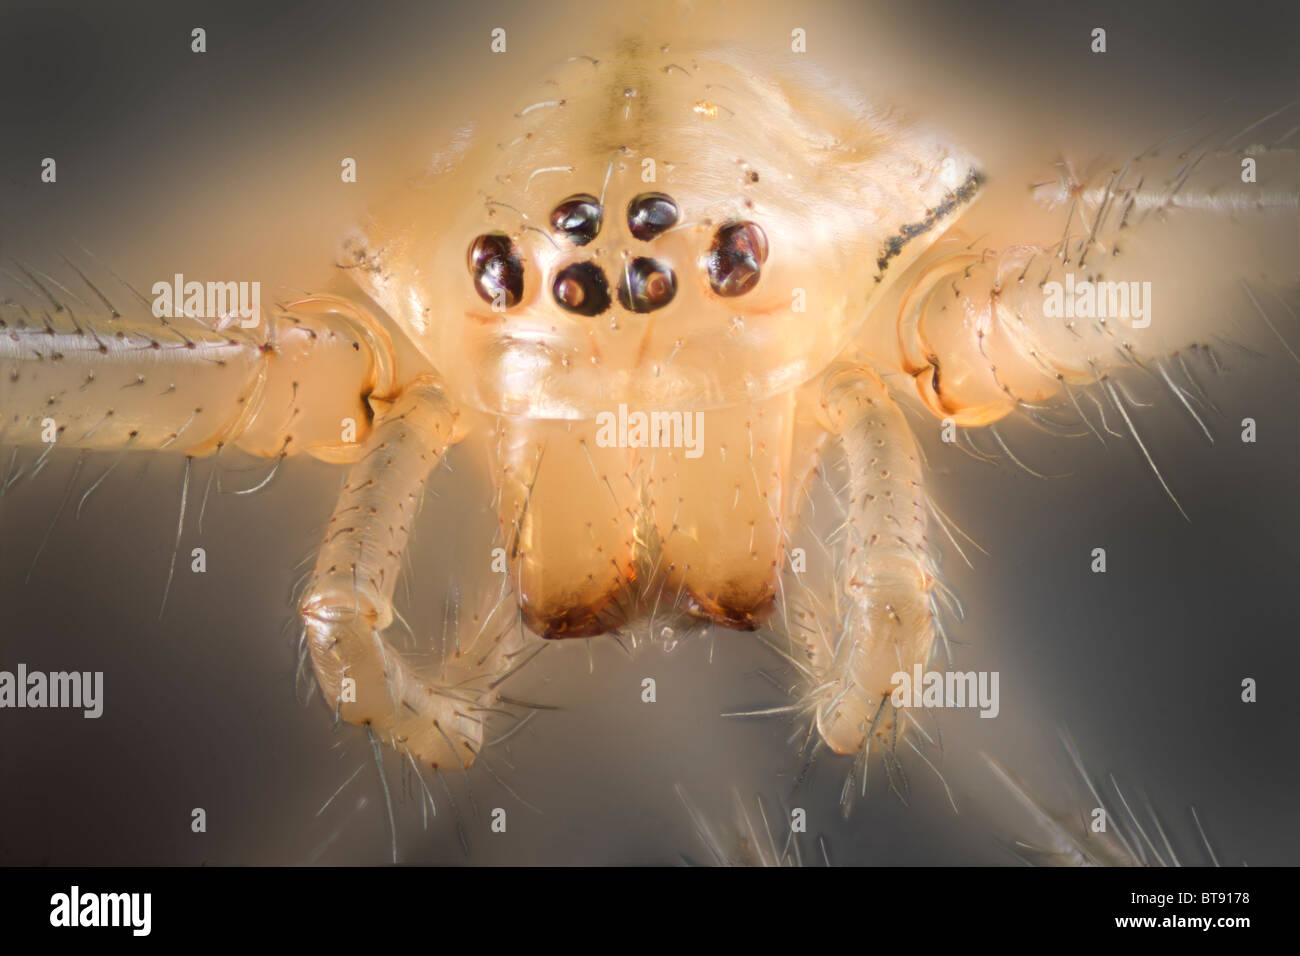 High macro view of a comb-footed spider, showing simple eye detail, front view Stock Photo